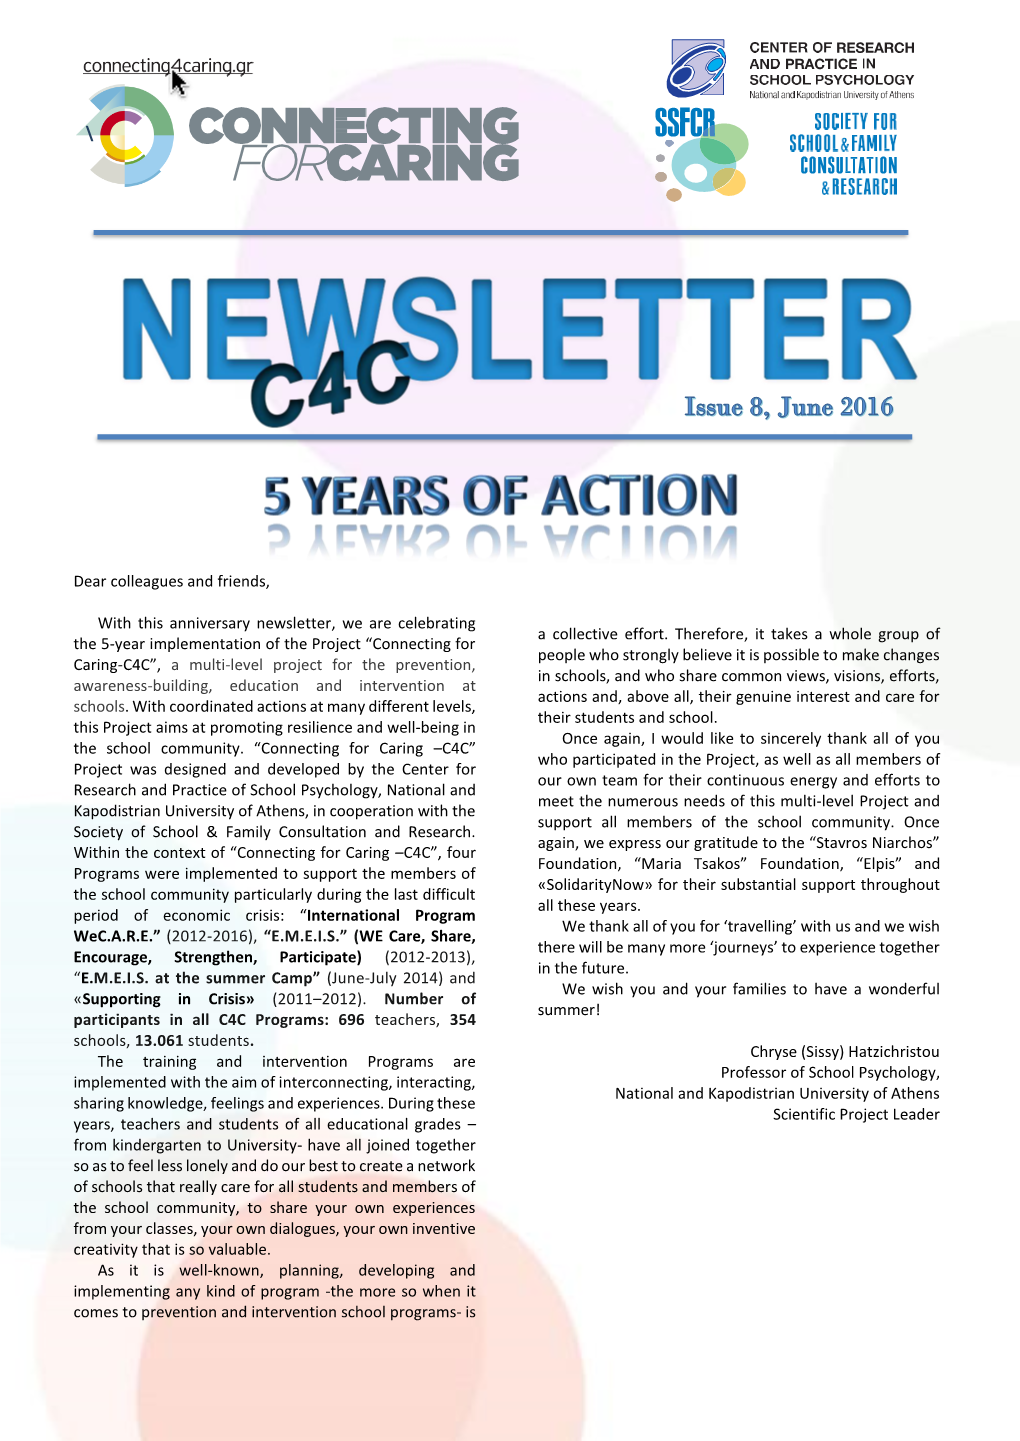 Dear Colleagues and Friends, with This Anniversary Newsletter, We Are Celebrating the 5-Year Implementation of the Project